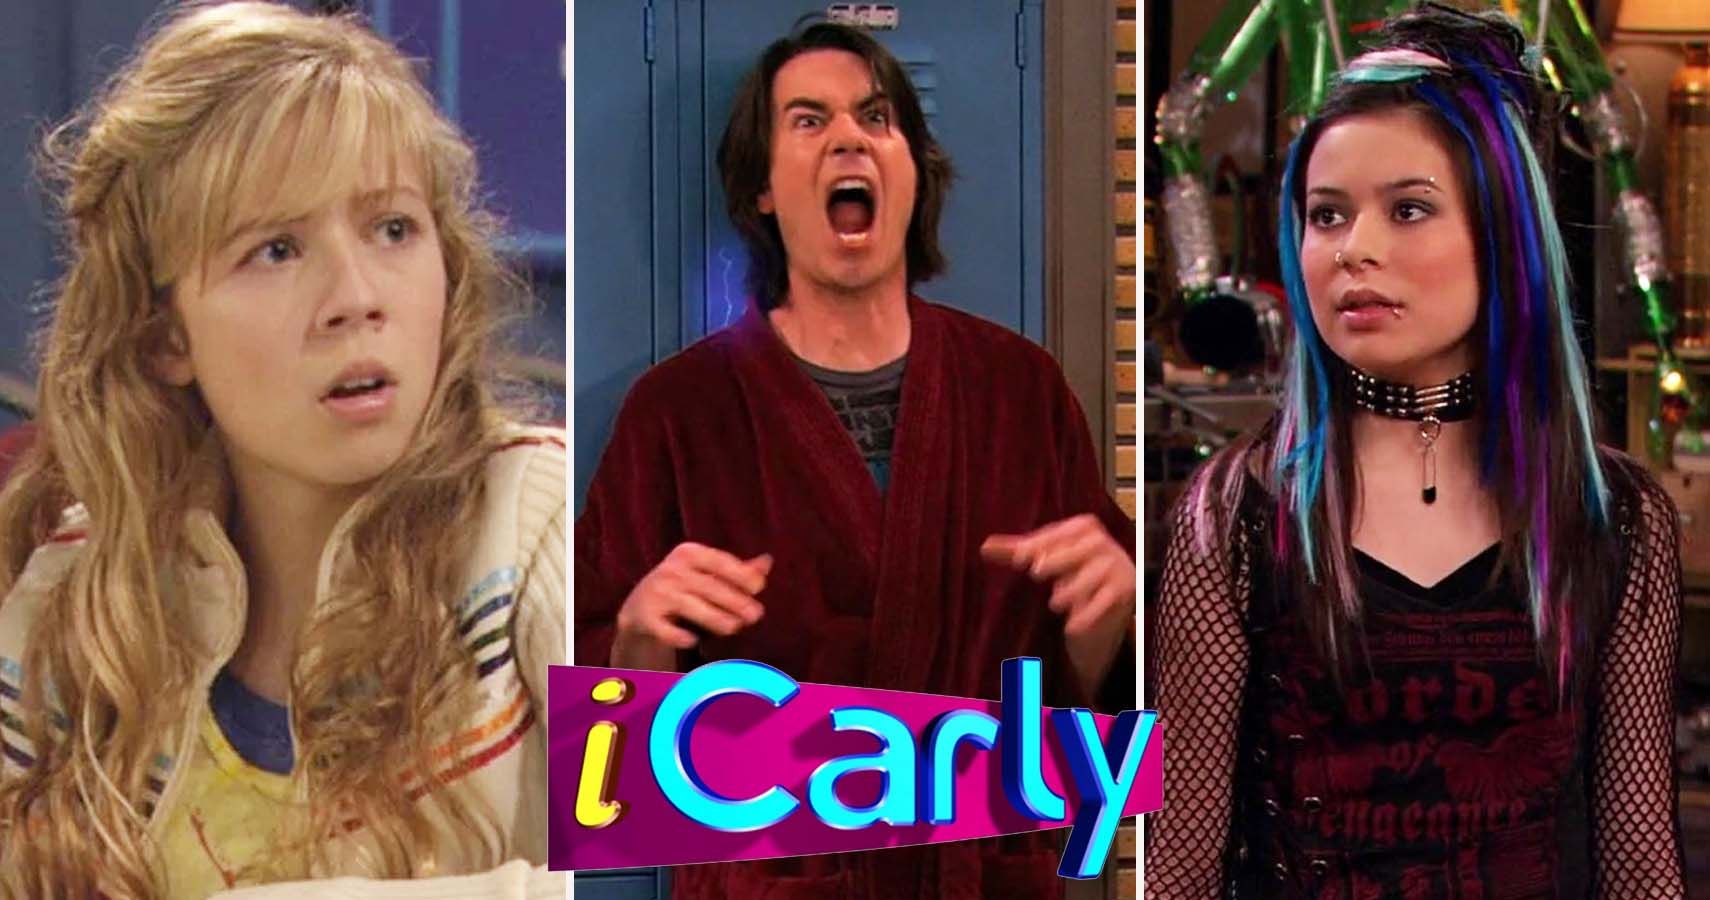 Cannot believe we icarly's got to work with the amazing miss emma ston...